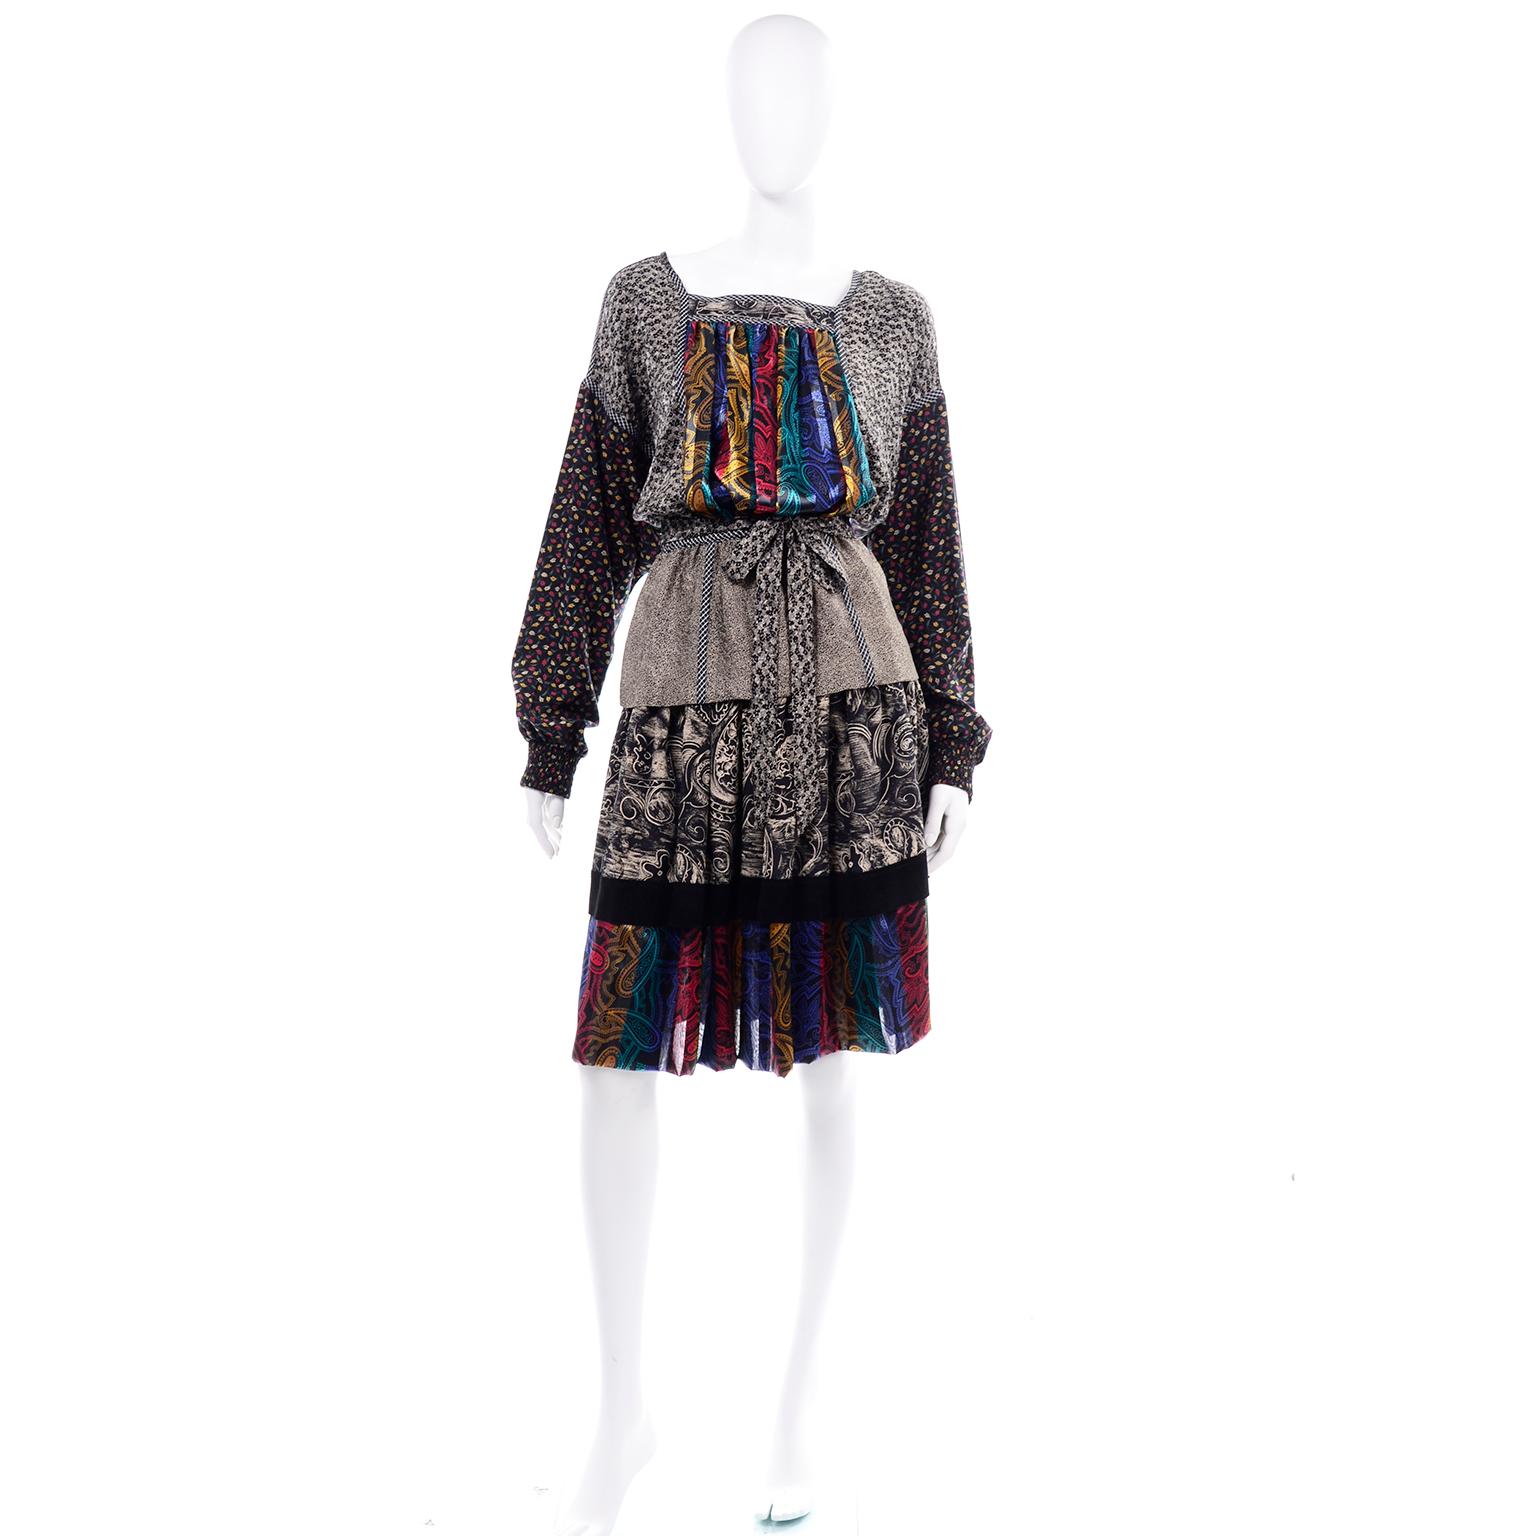 We absolutely love this vintage Koos Van den Akker couture two piece dress! We have always admired the ability Van den Akker had to mix textures and designs into a cohesive pattern. This incredible collage style print outfit includes a  skirt and a